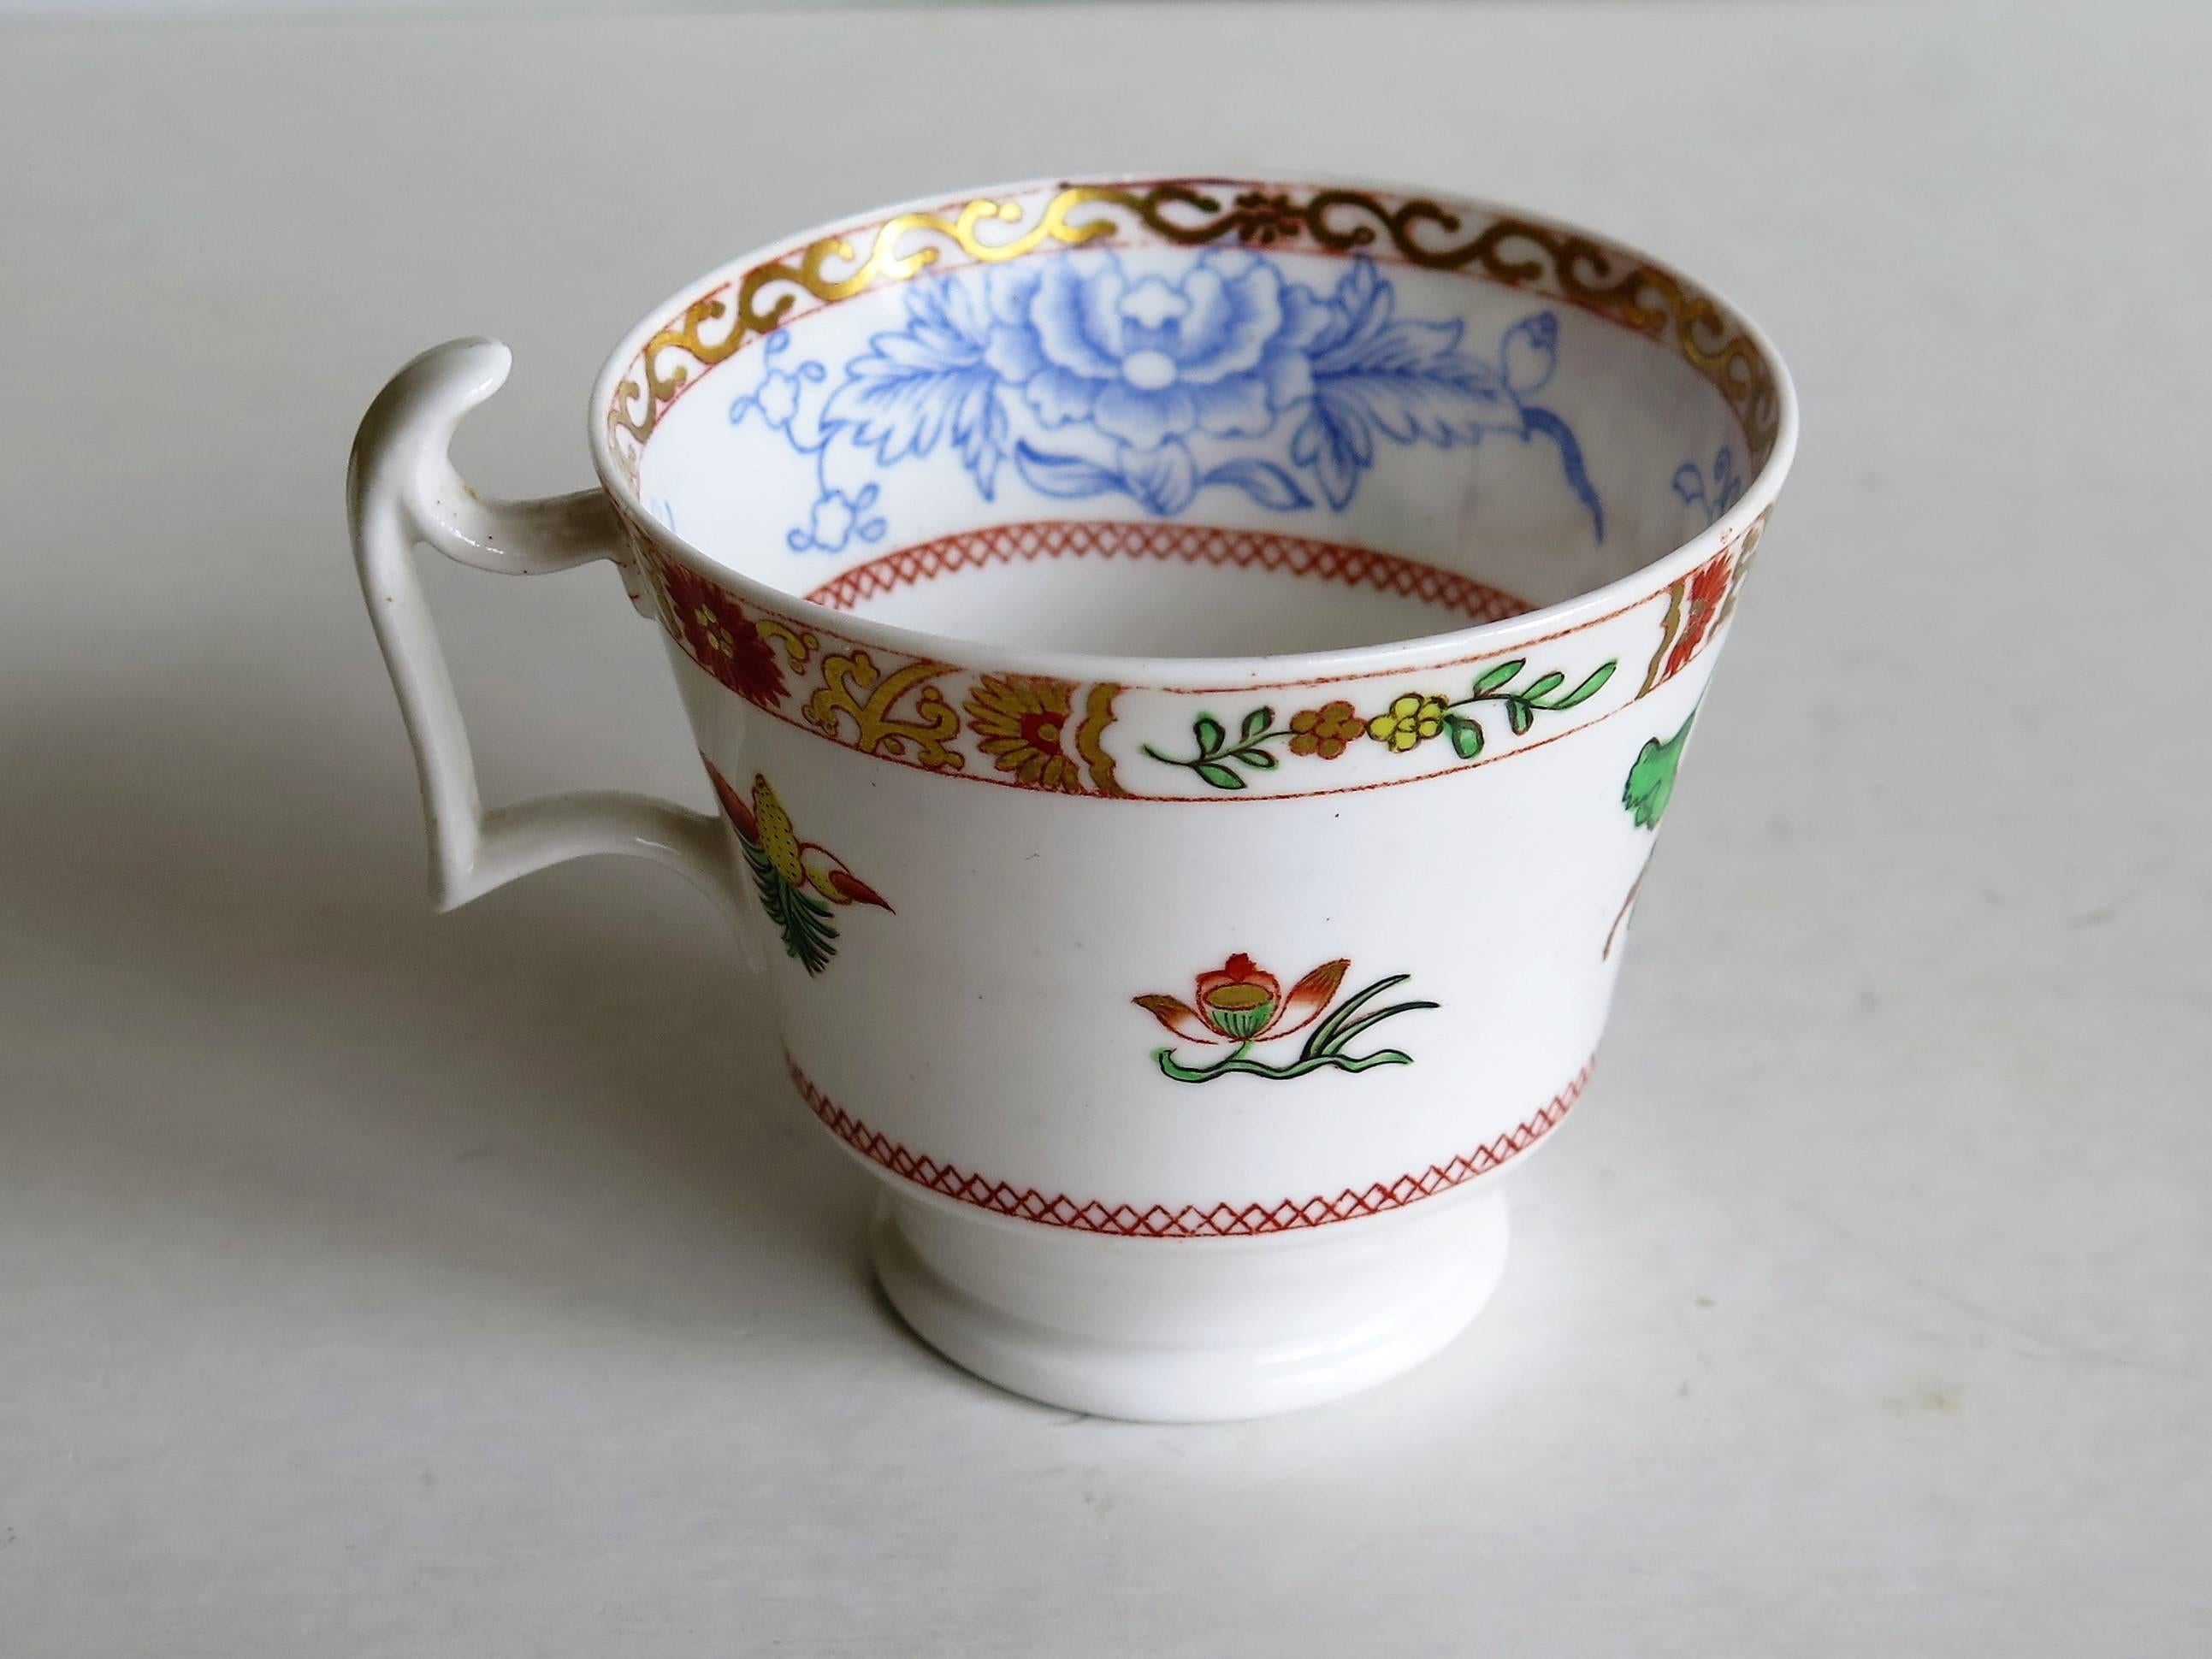 Early 19th C Spode Cup and Saucer Porcelain Chinoiserie Pattern 2638, Circa 1815 4